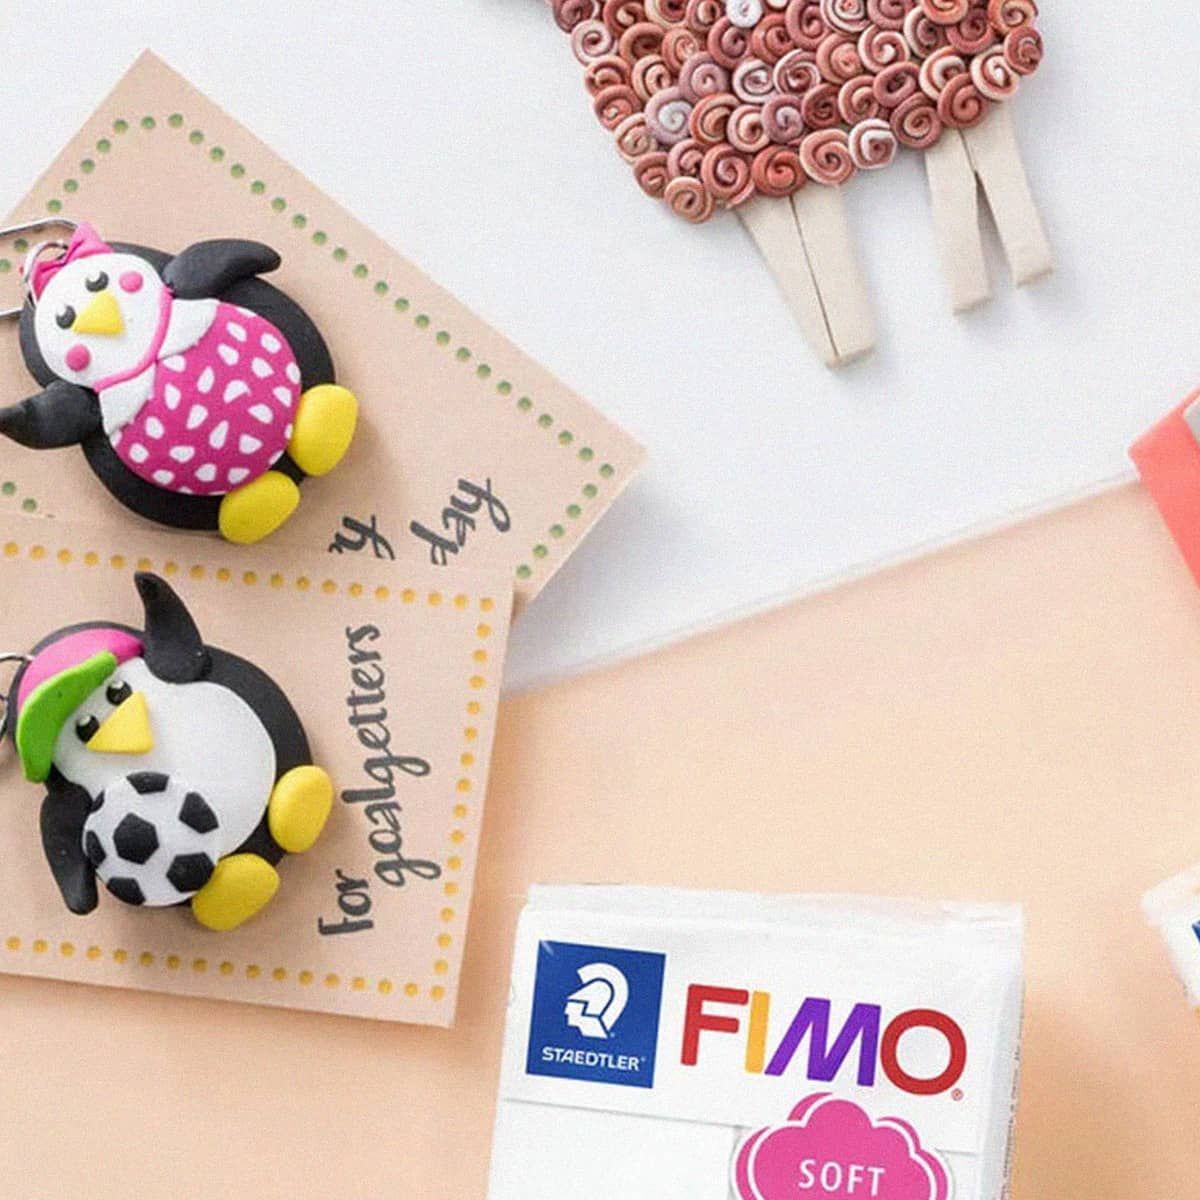 Bring creative ideas to life with FIMO soft clays